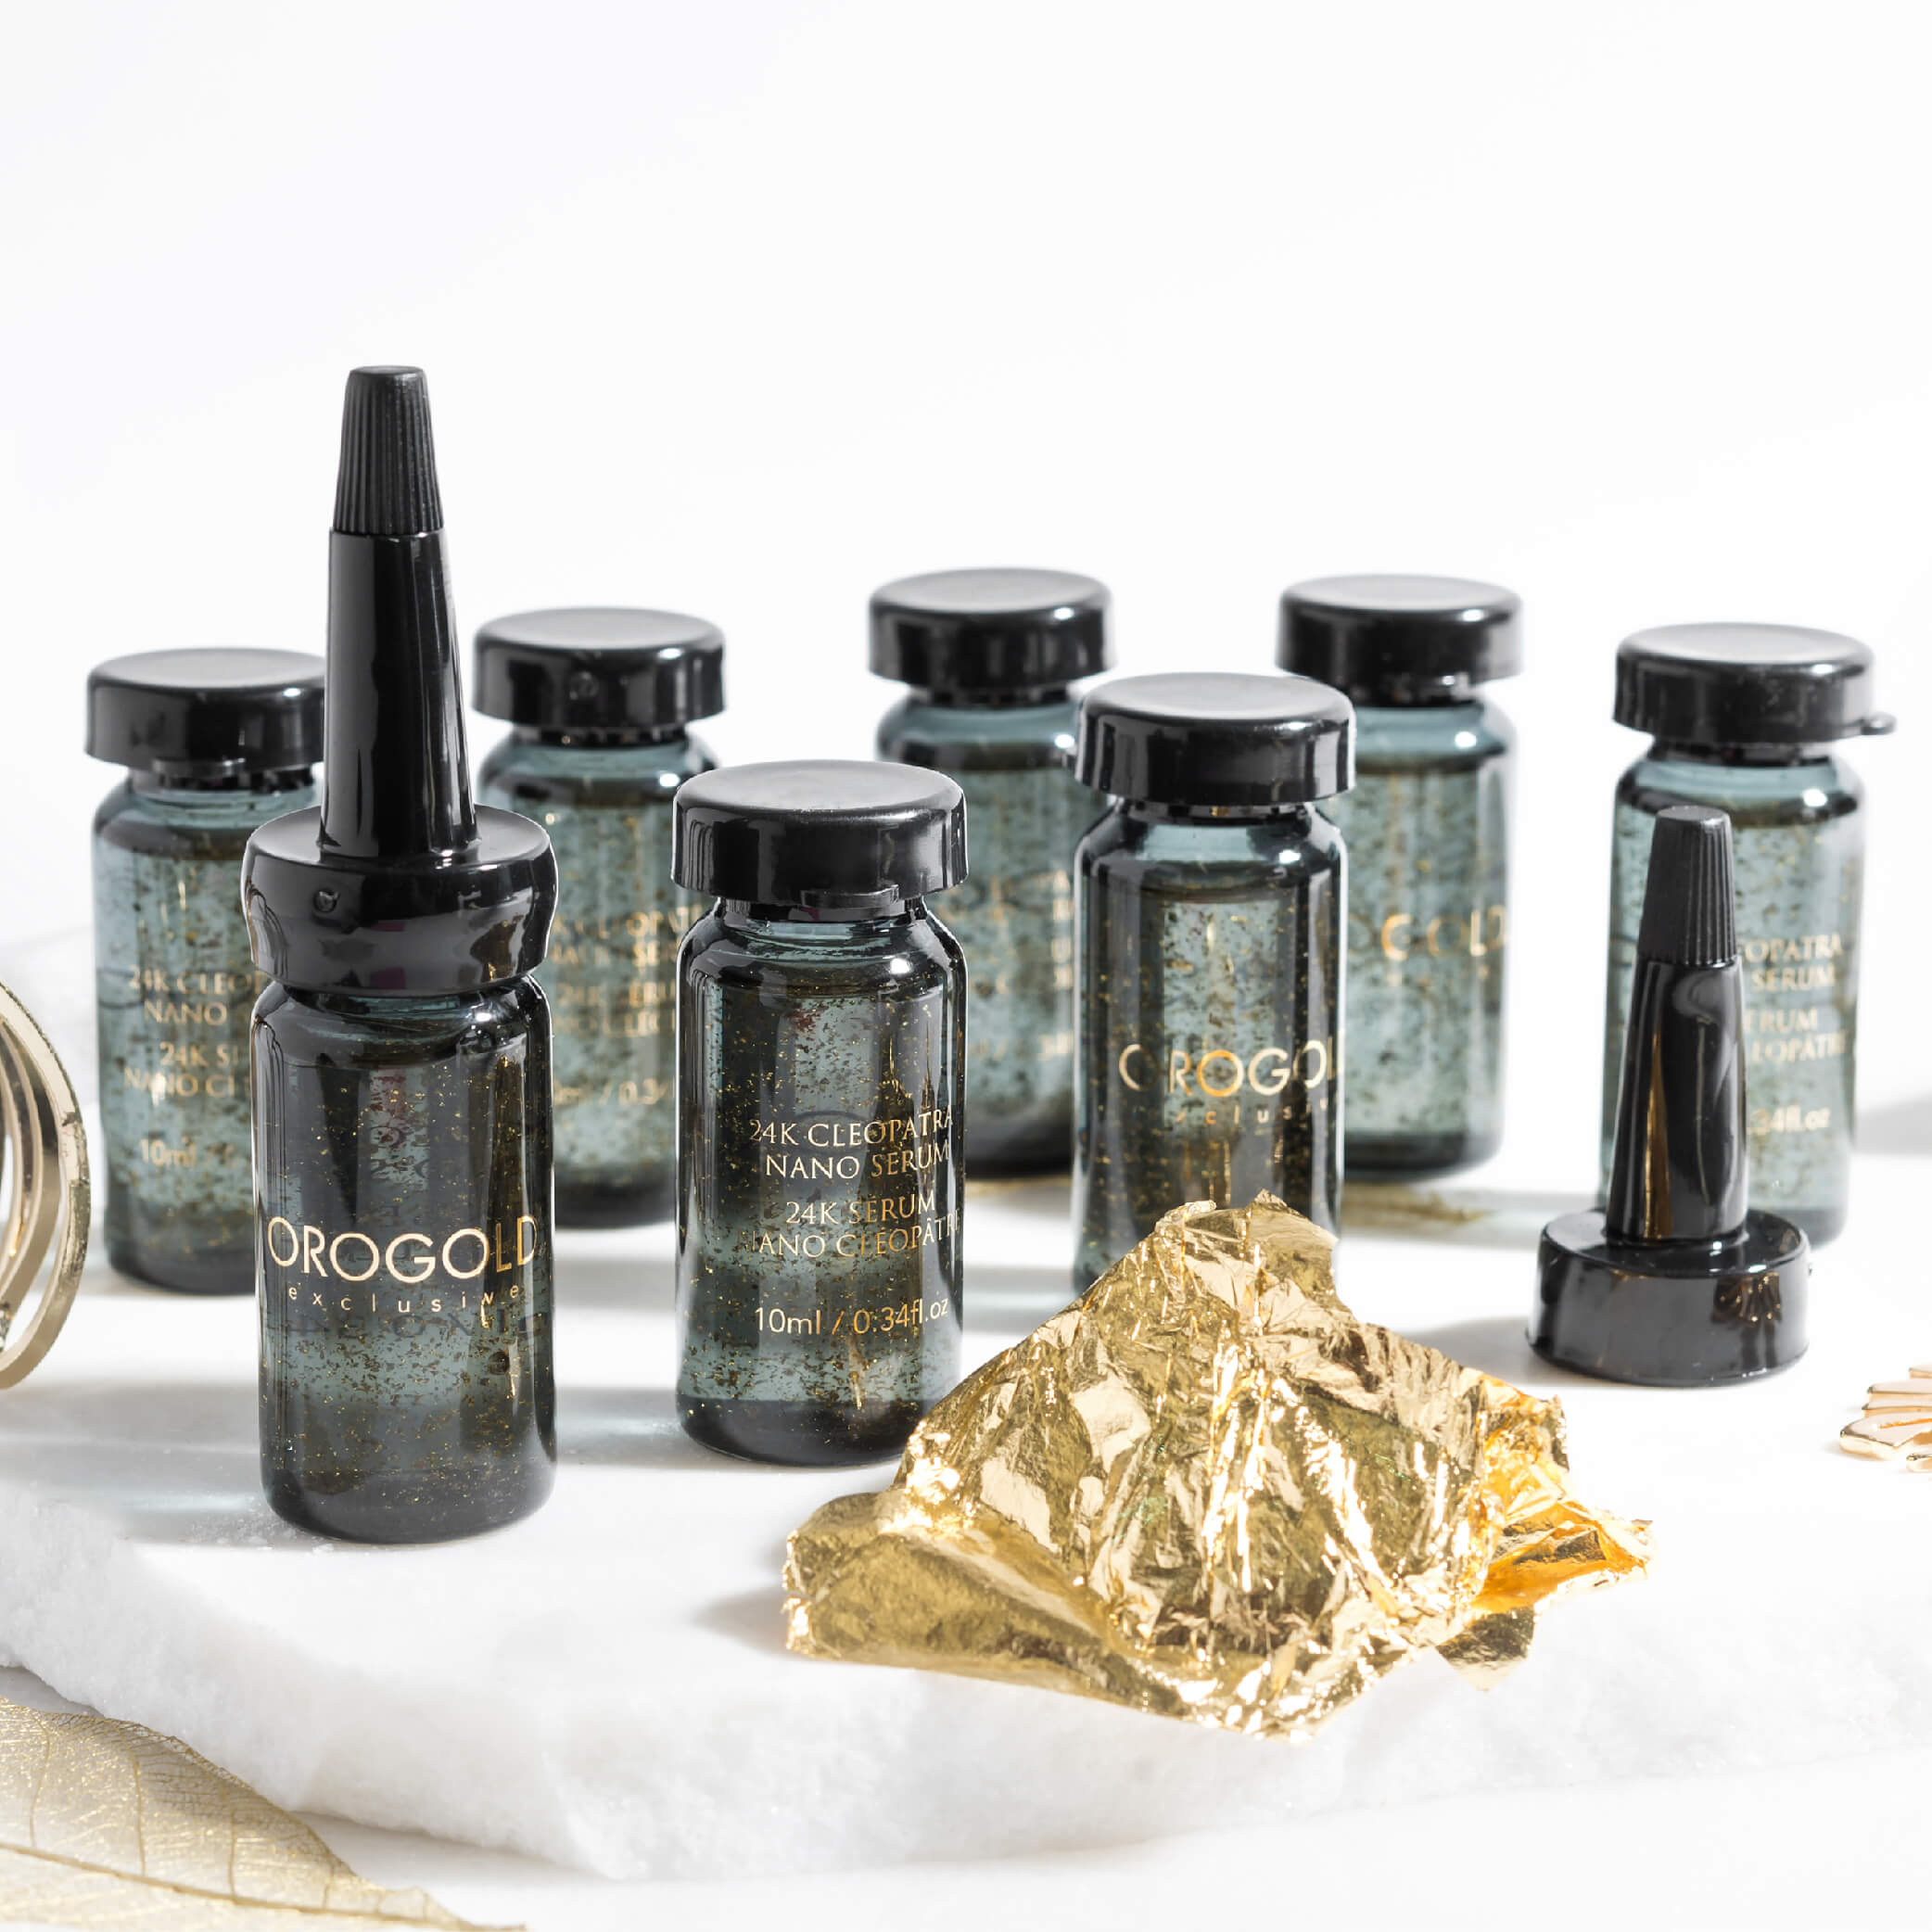 The Cleopatra Nano Regimen is a good new year's resolutions for your skin